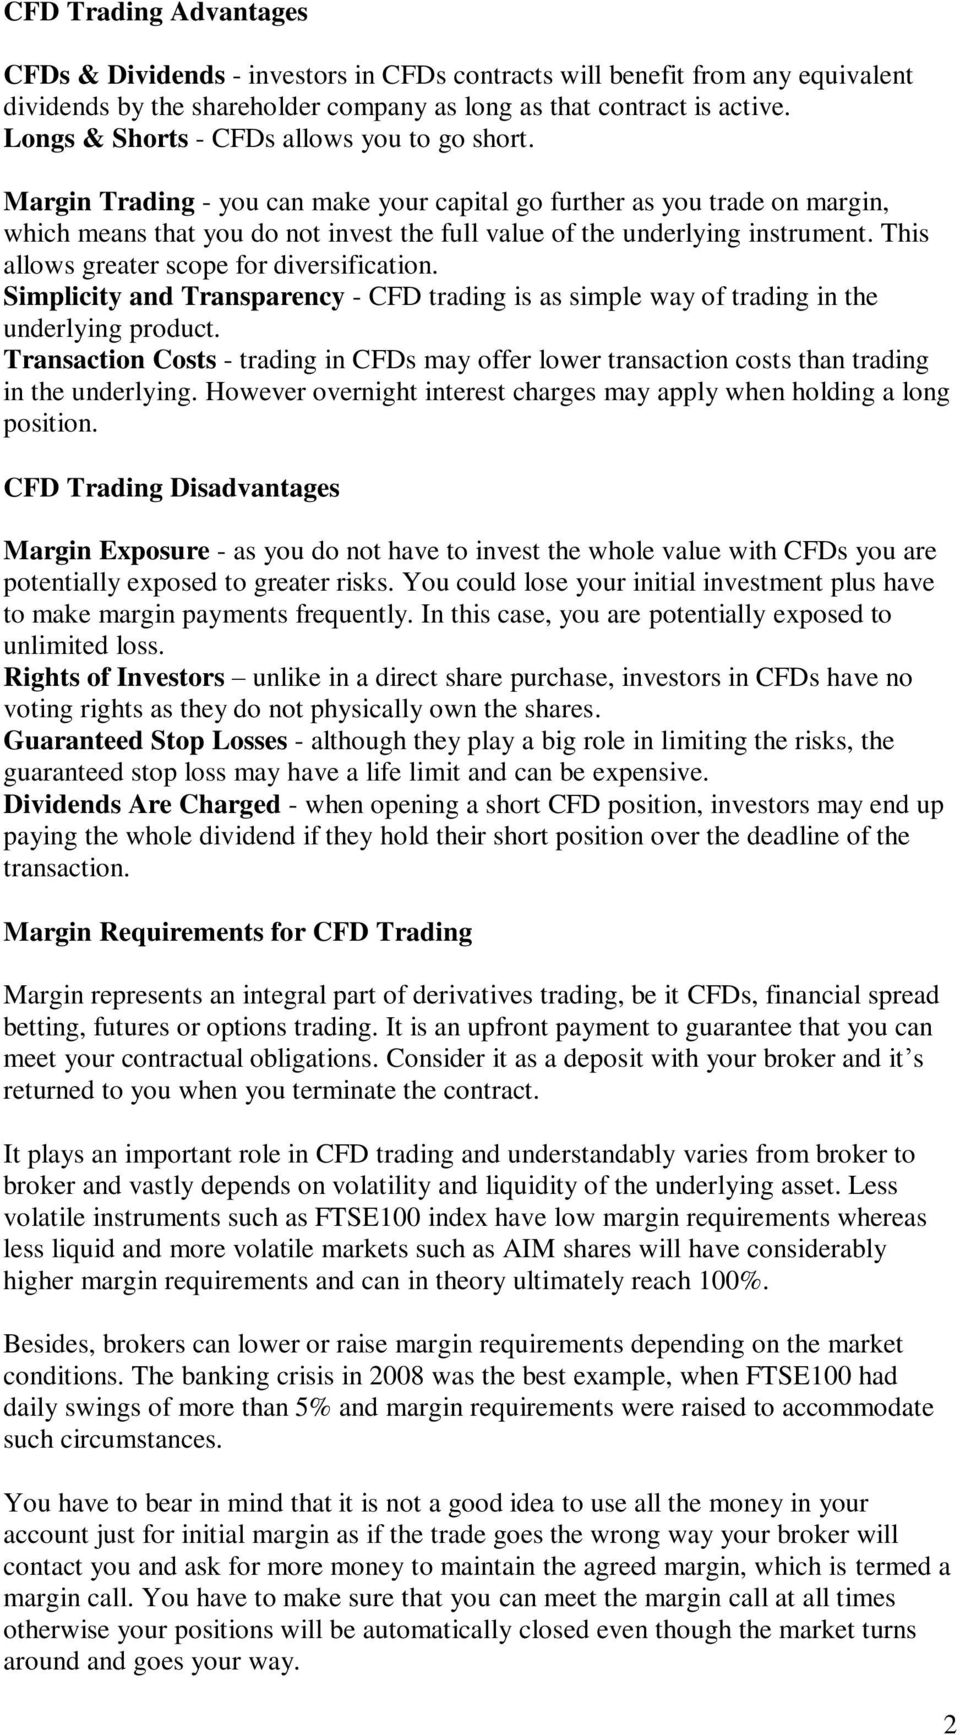 Margin Trading - you can make your capital go further as you trade on margin, which means that you do not invest the full value of the underlying instrument.